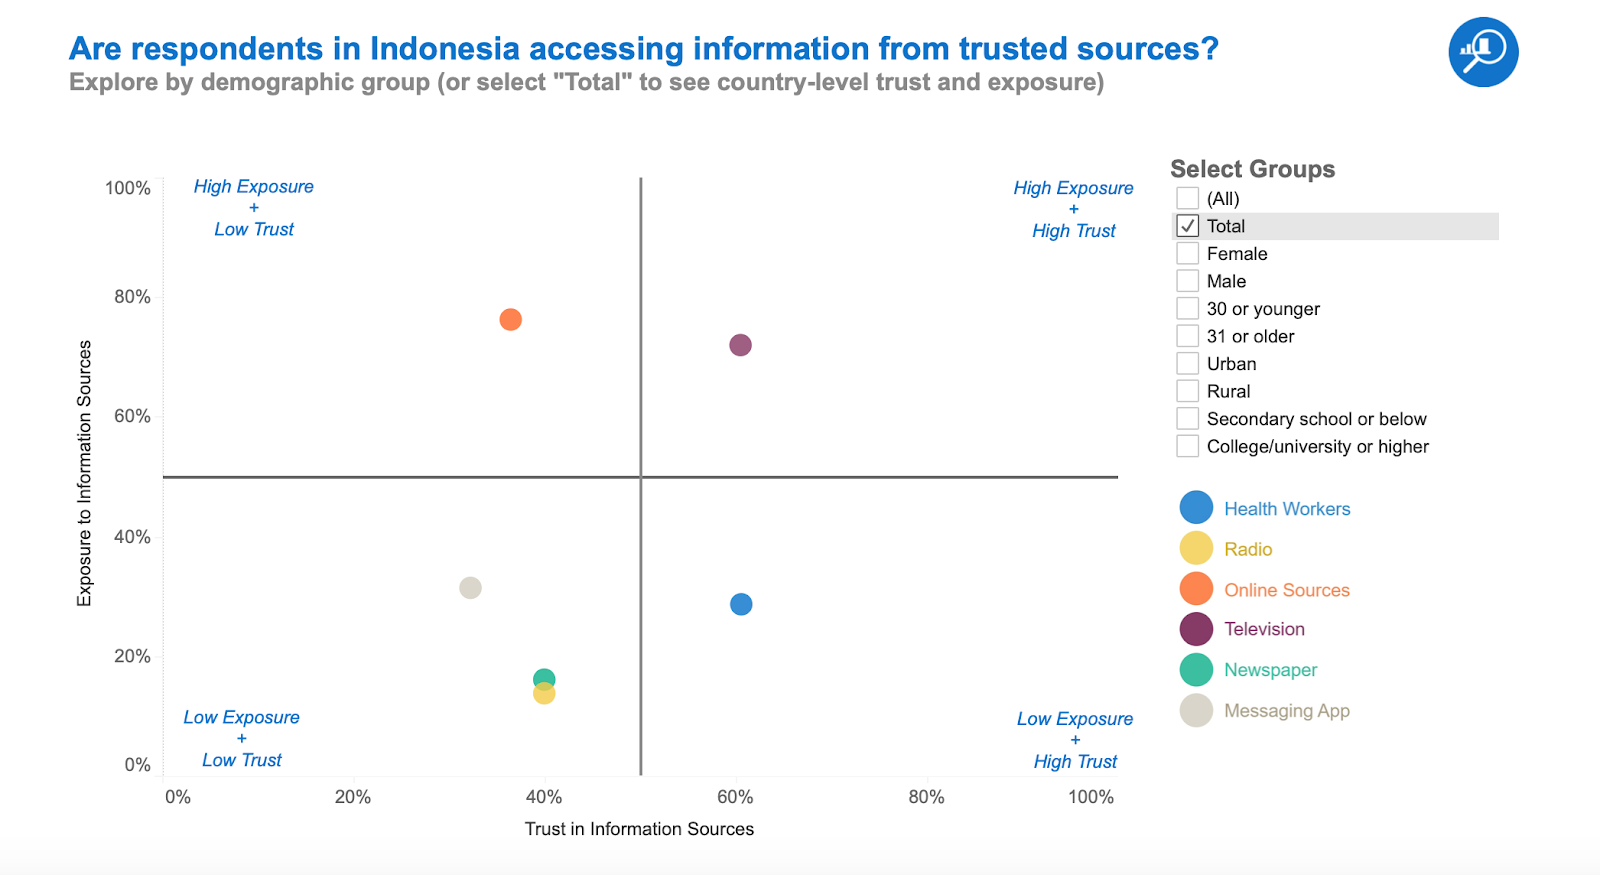 Are respondents in Indonesia accessing information from trusted sources?